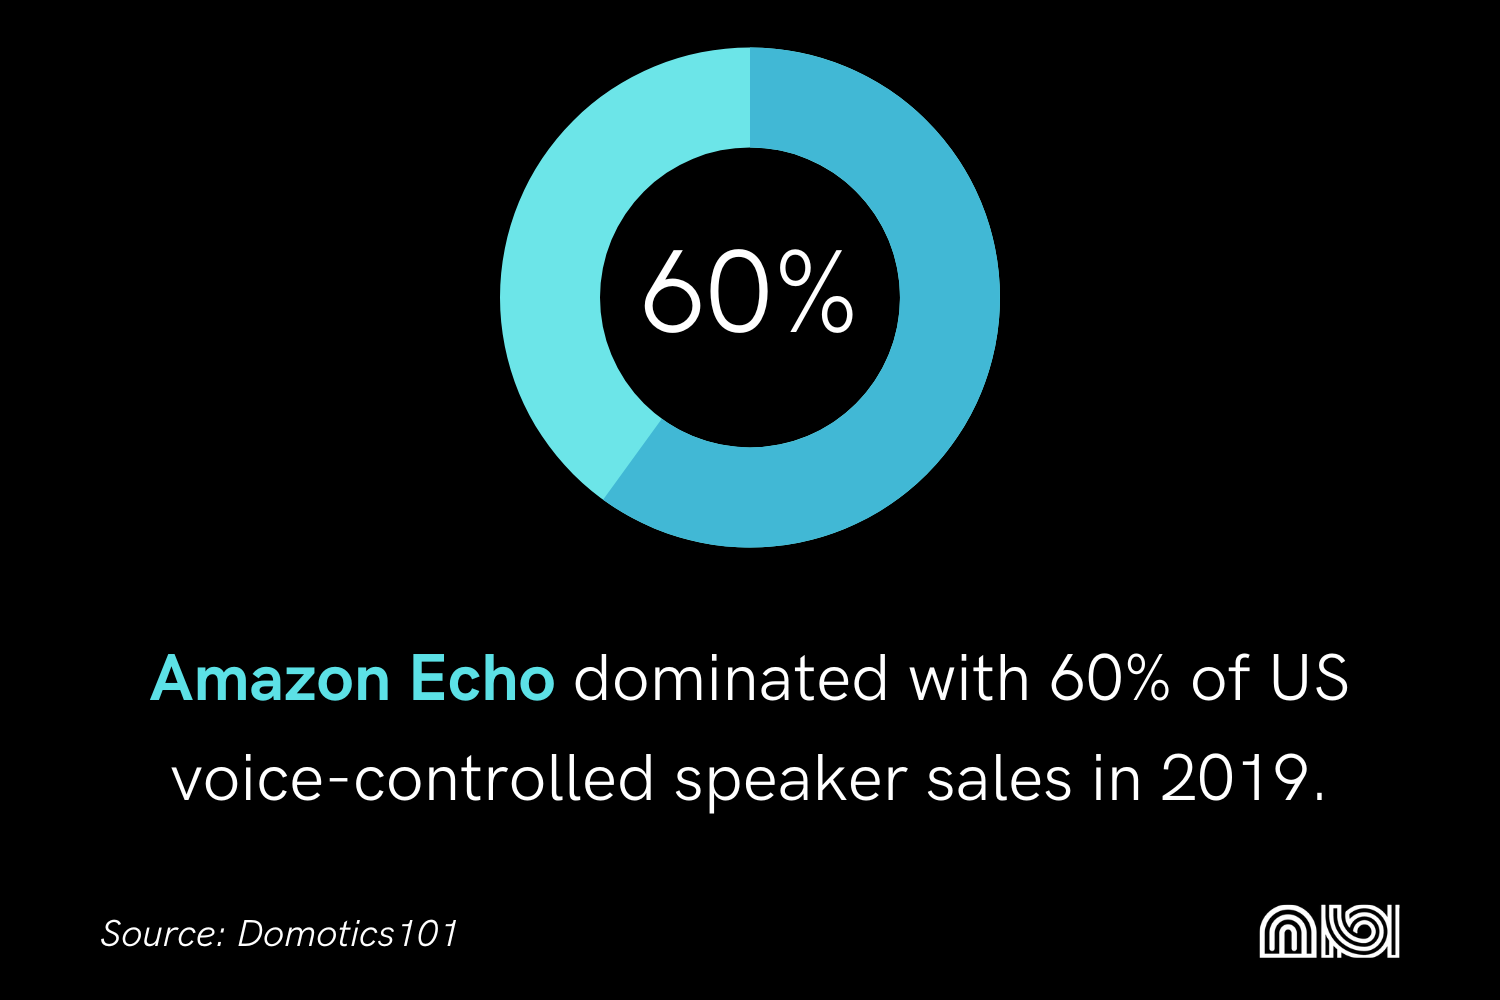 Amazon Echo: 60% share of US voice-controlled speaker sales in 2019.